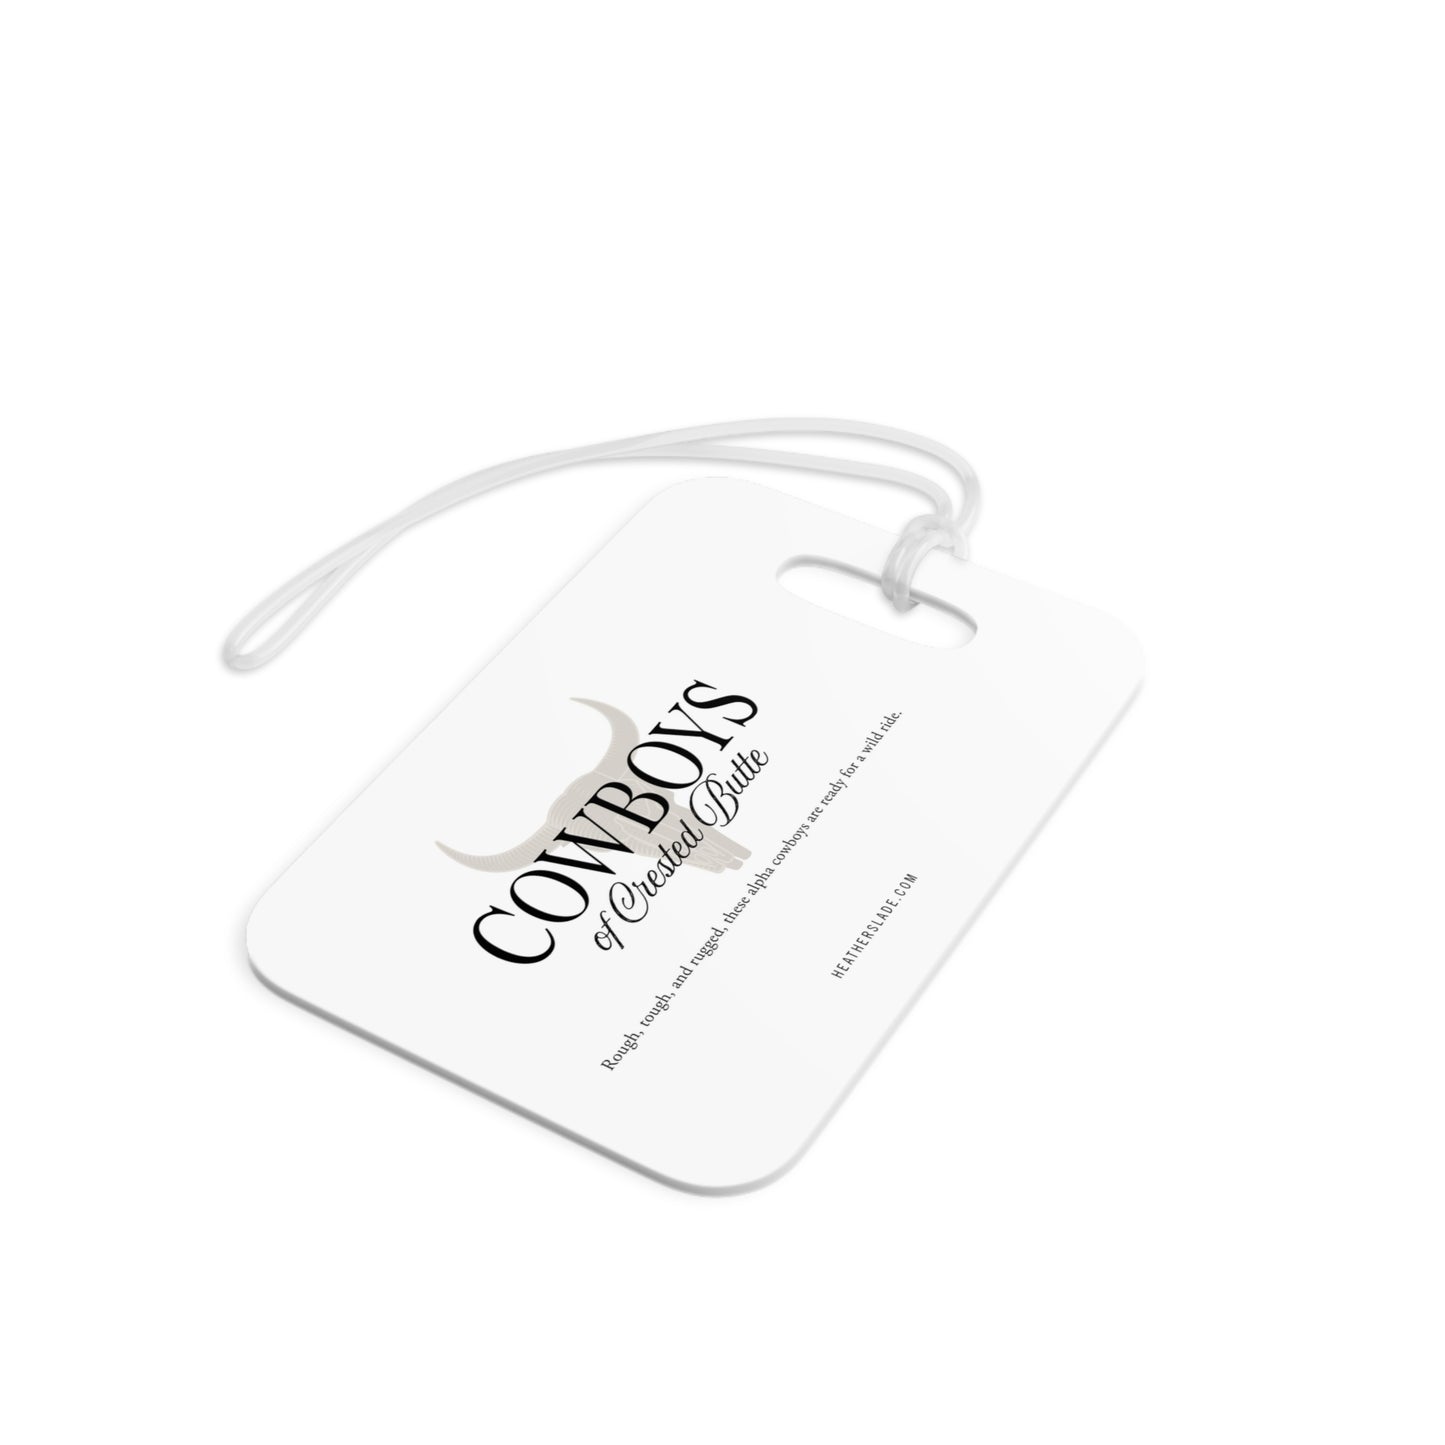 Cowboys of Crested Butte Luggage Tags